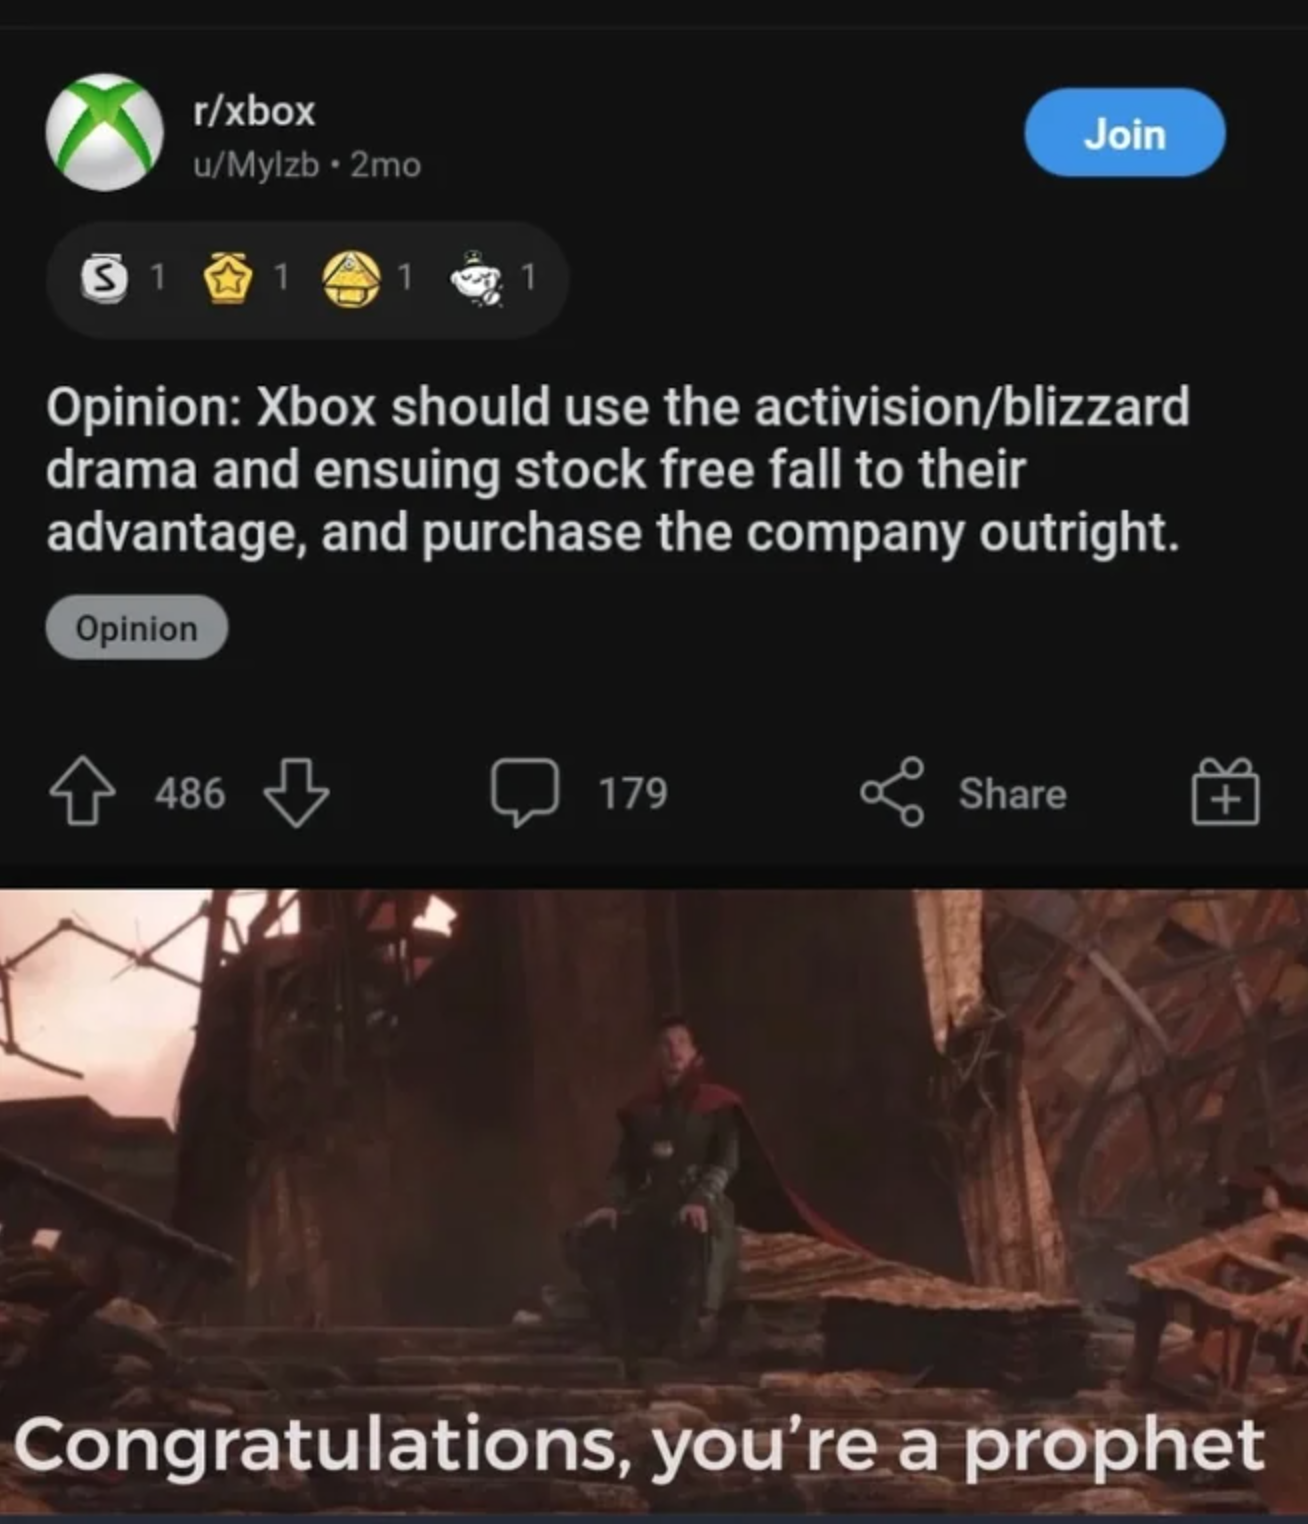 funny gaming memes - screenshot - rxbox uMylzb2mo Join Opinion Xbox should use the activisionblizzard drama and ensuing stock free fall to their advantage, and purchase the company outright. Opinion 486 179 Congratulations, you're a prophet